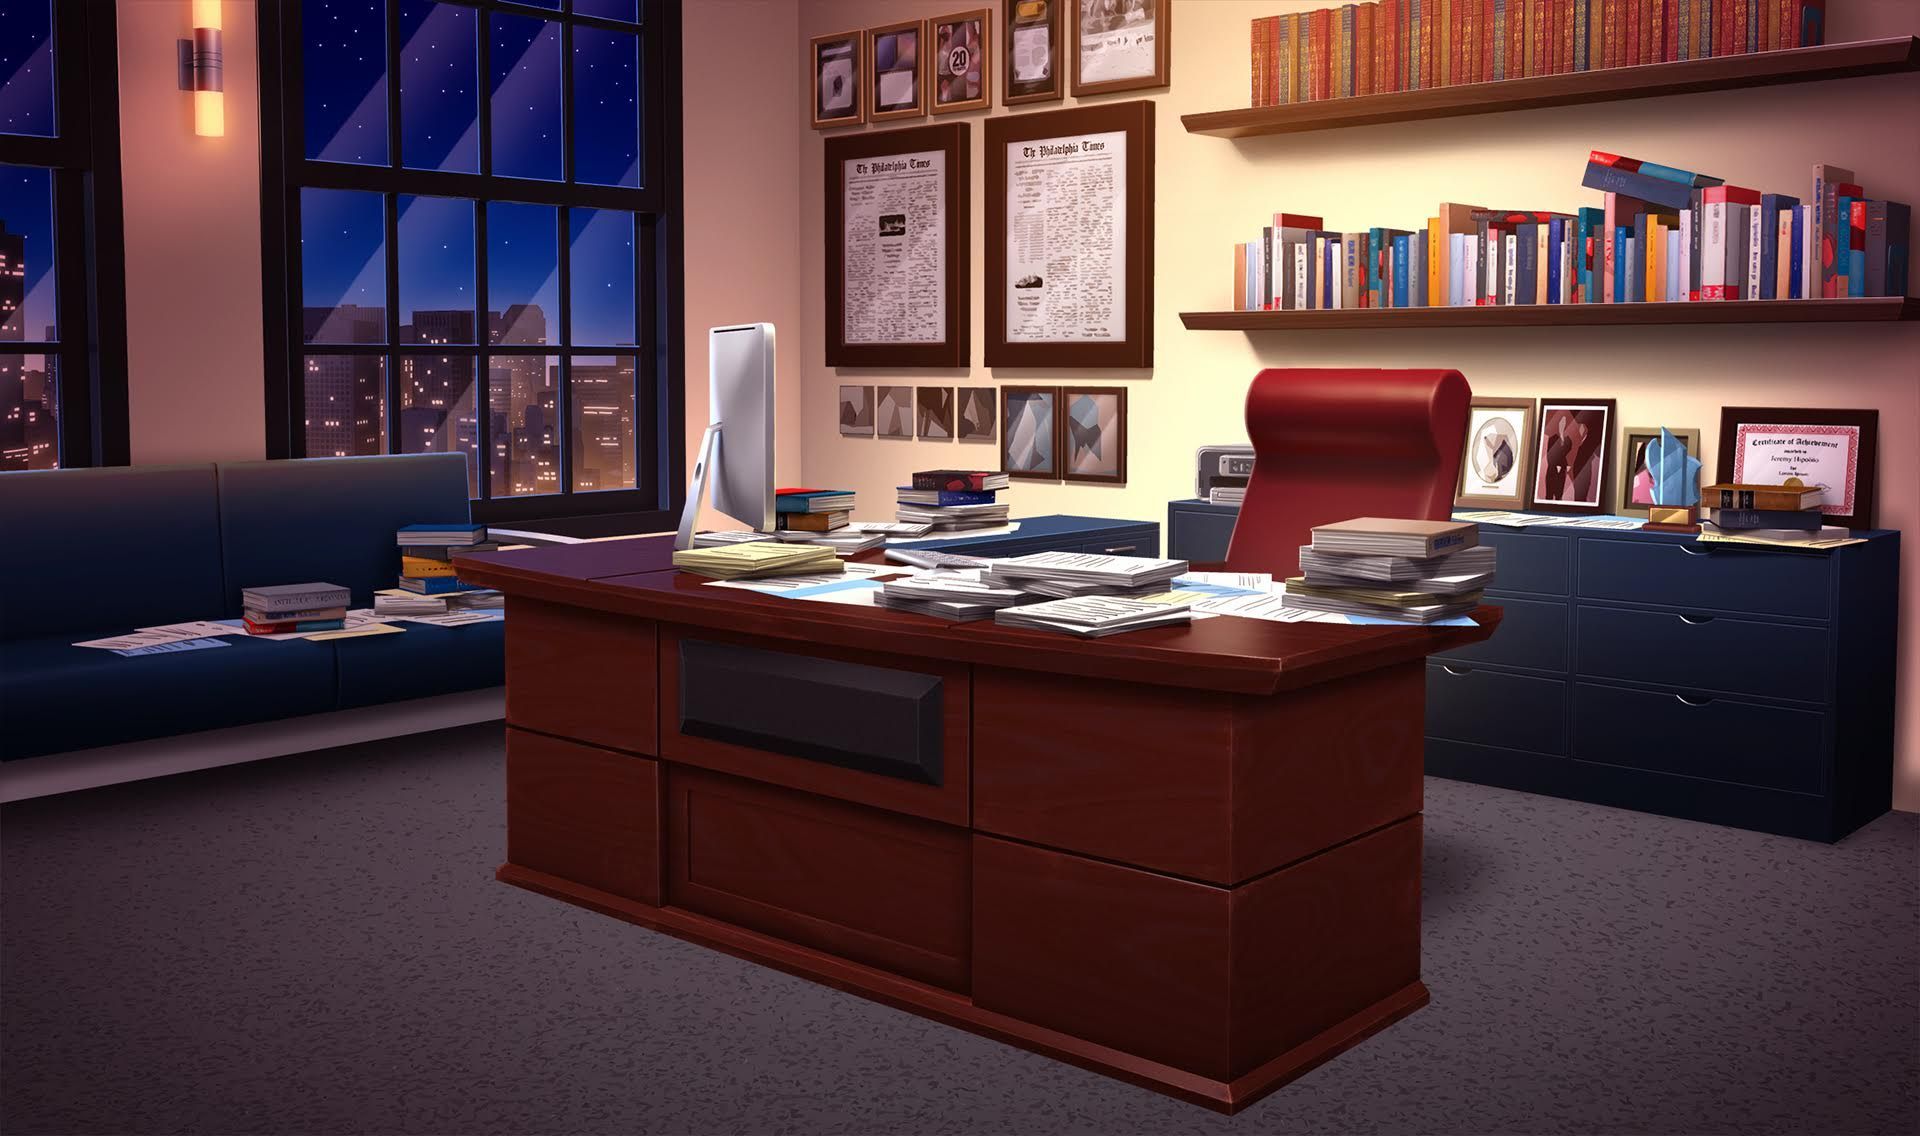 Animated office